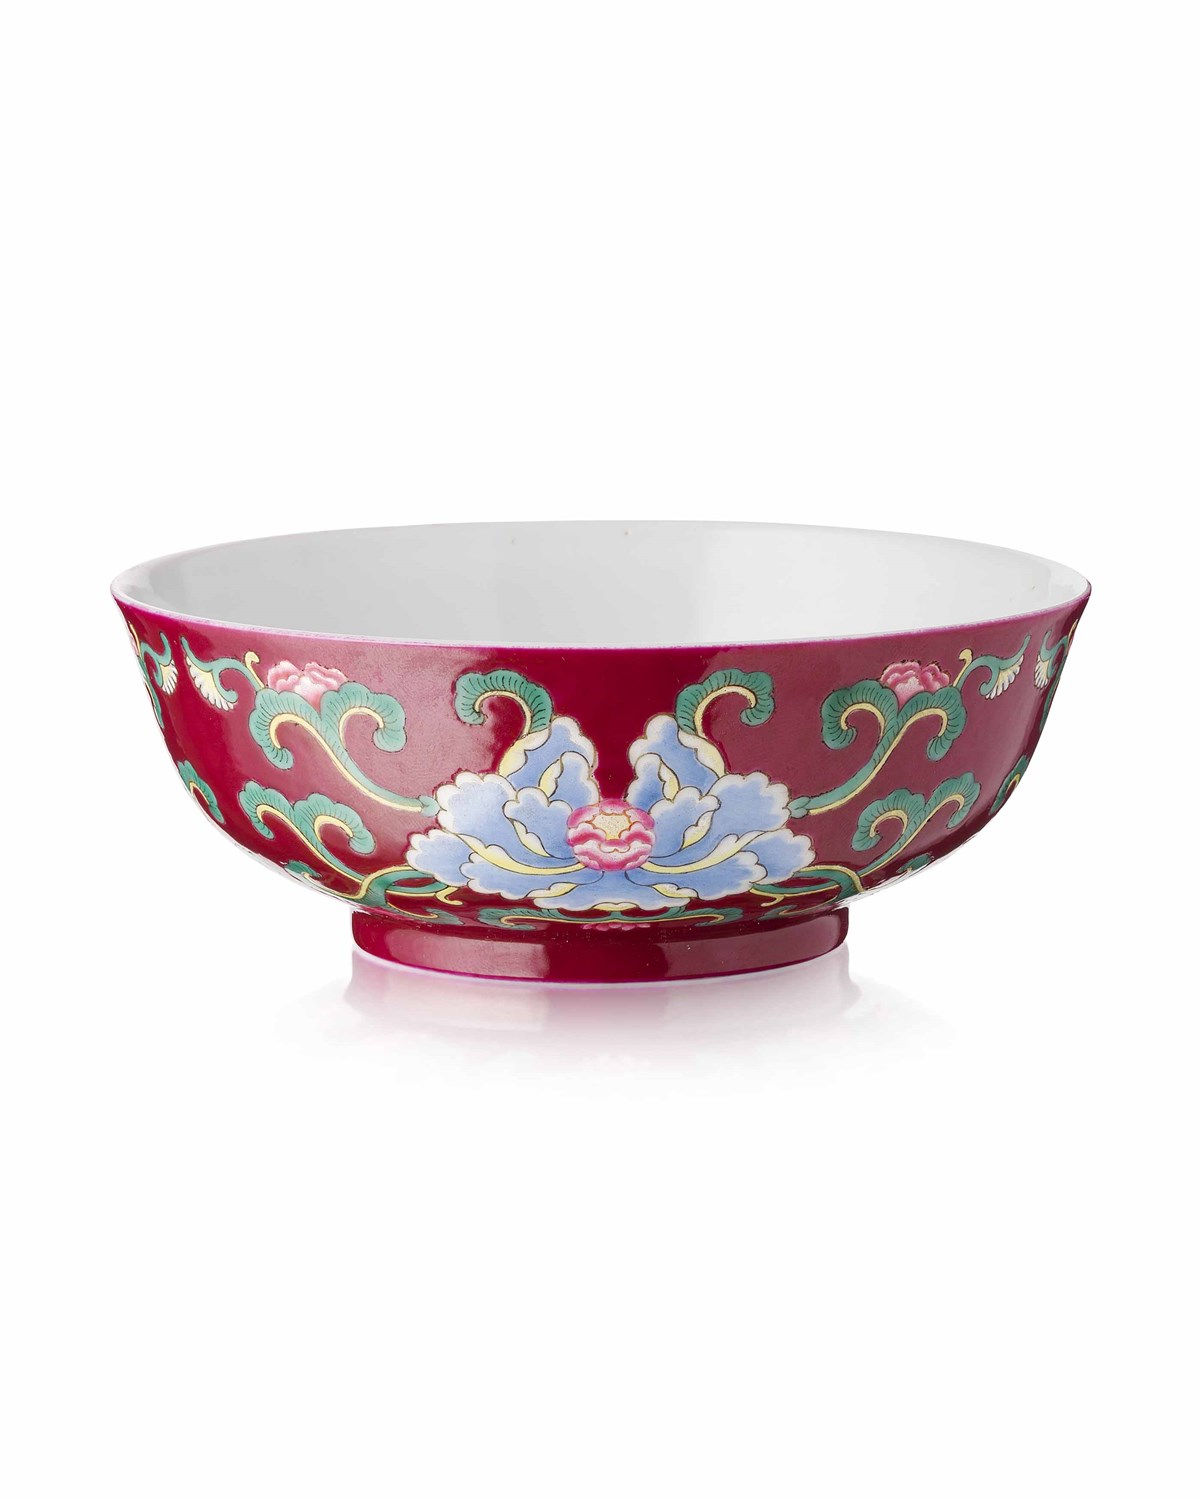 866 - FINE AND RARE RUBY-GROUND FAMILLE-ROSE 'PEONY' BOWL